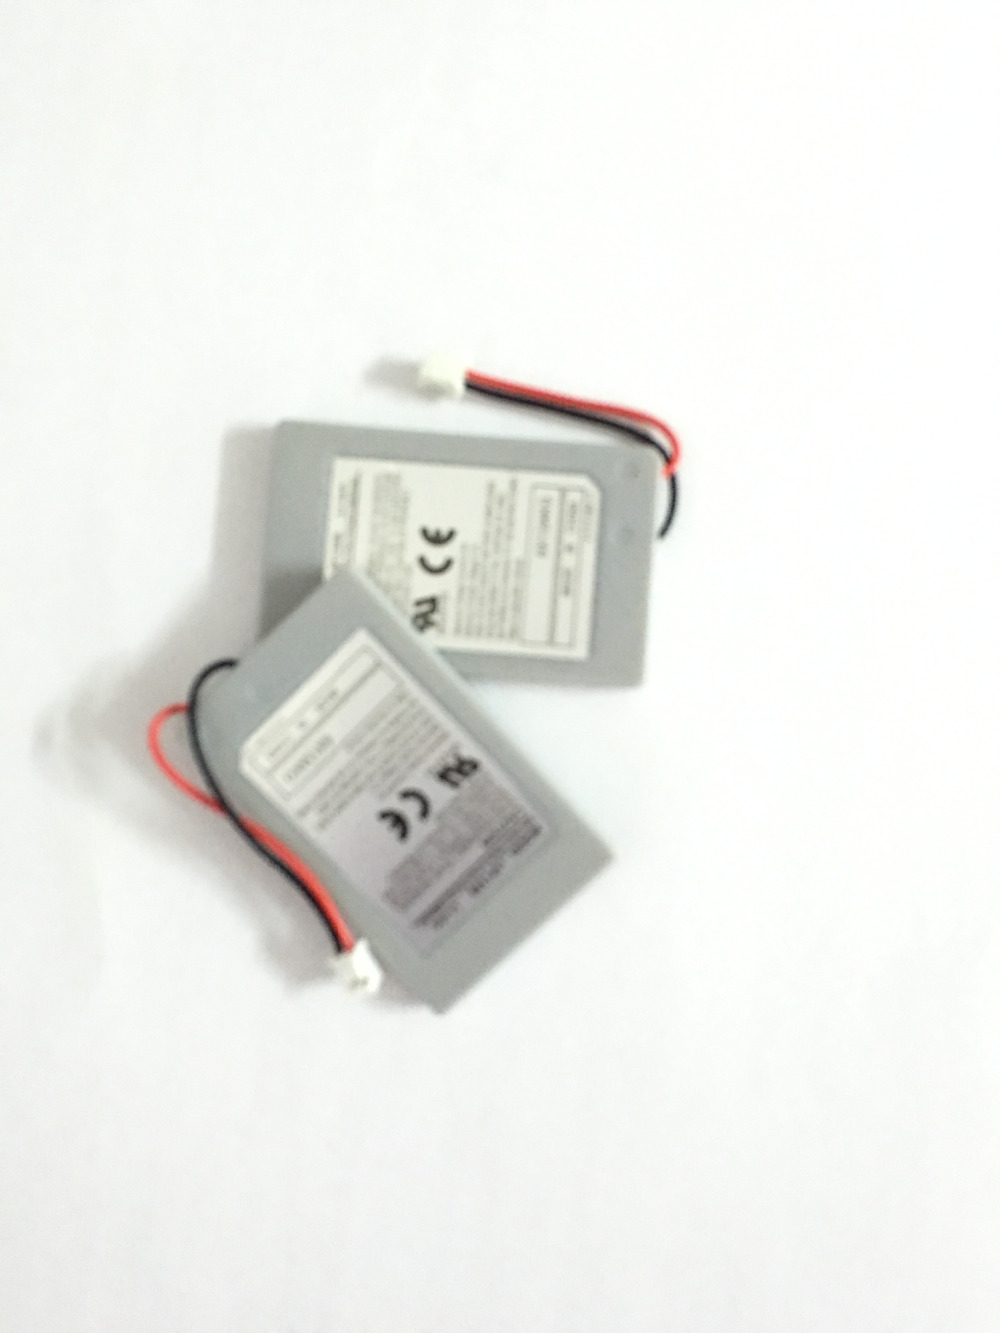 Original Wireless Controller Battery Pack Replacement for Sony PS3 Bluetooth Controller